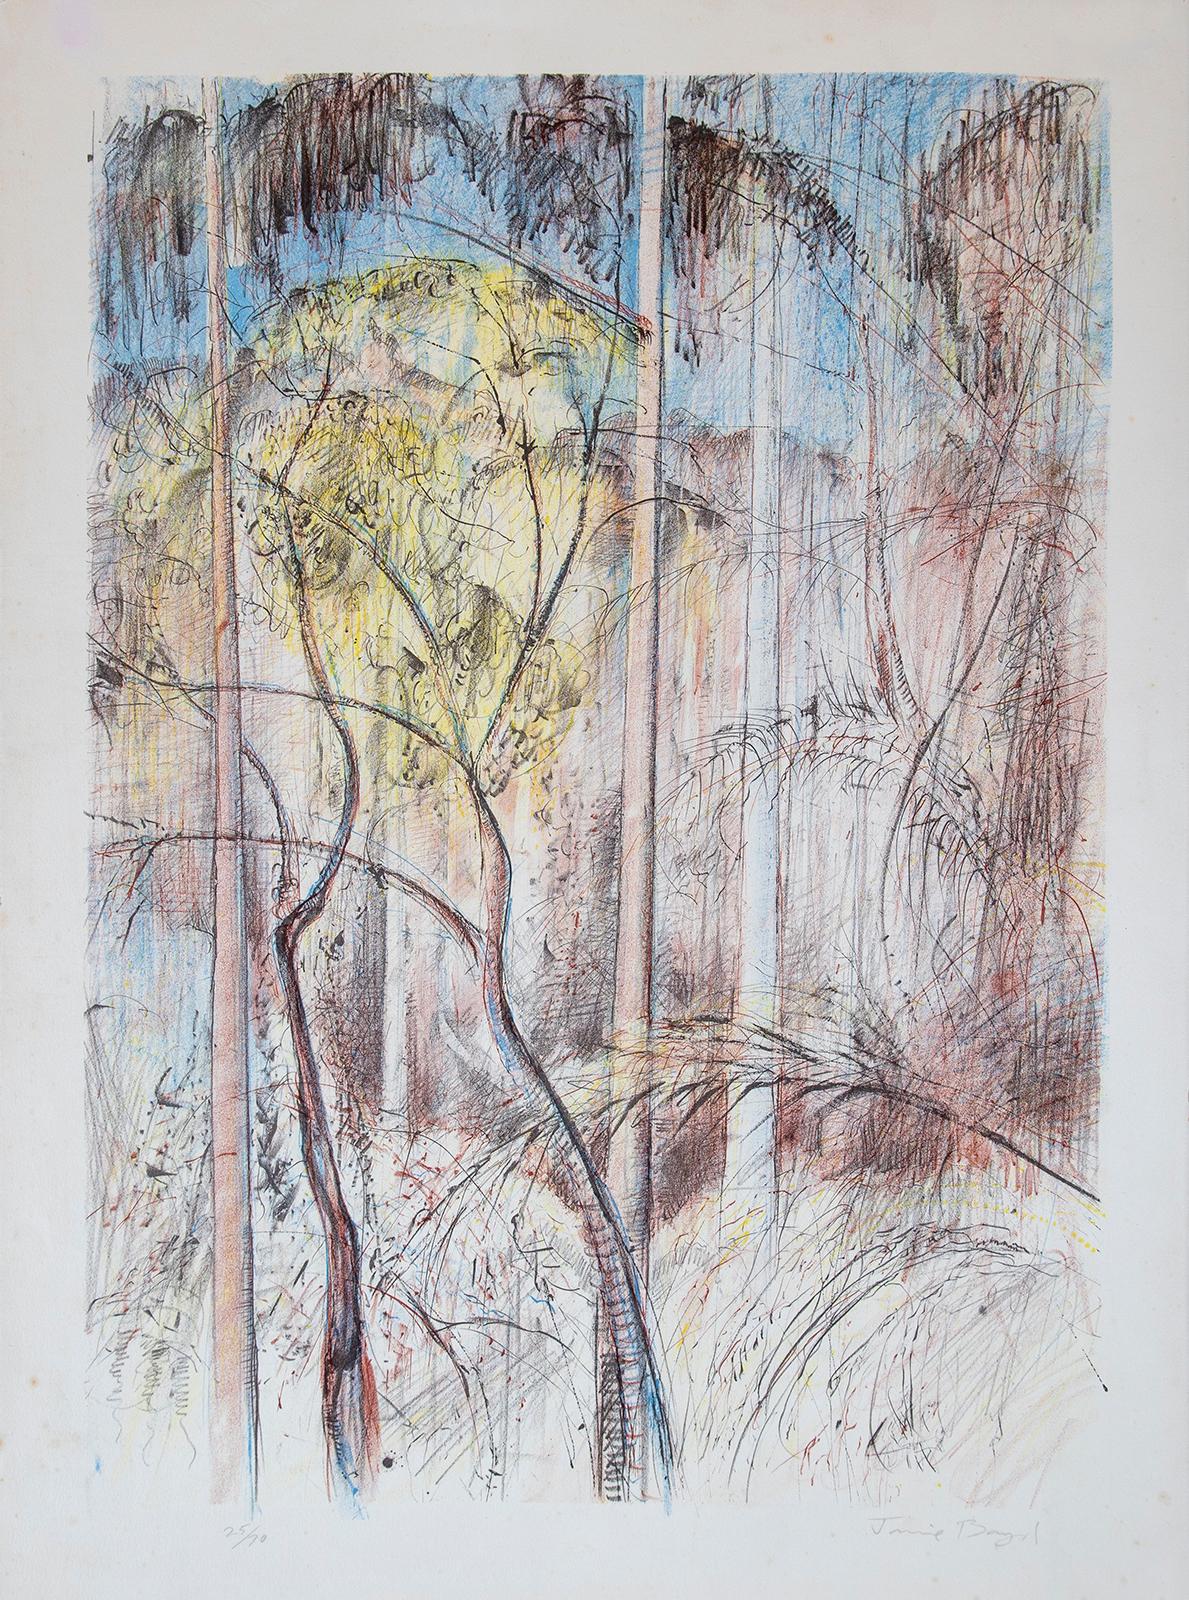 Bush scene with blue and yellow